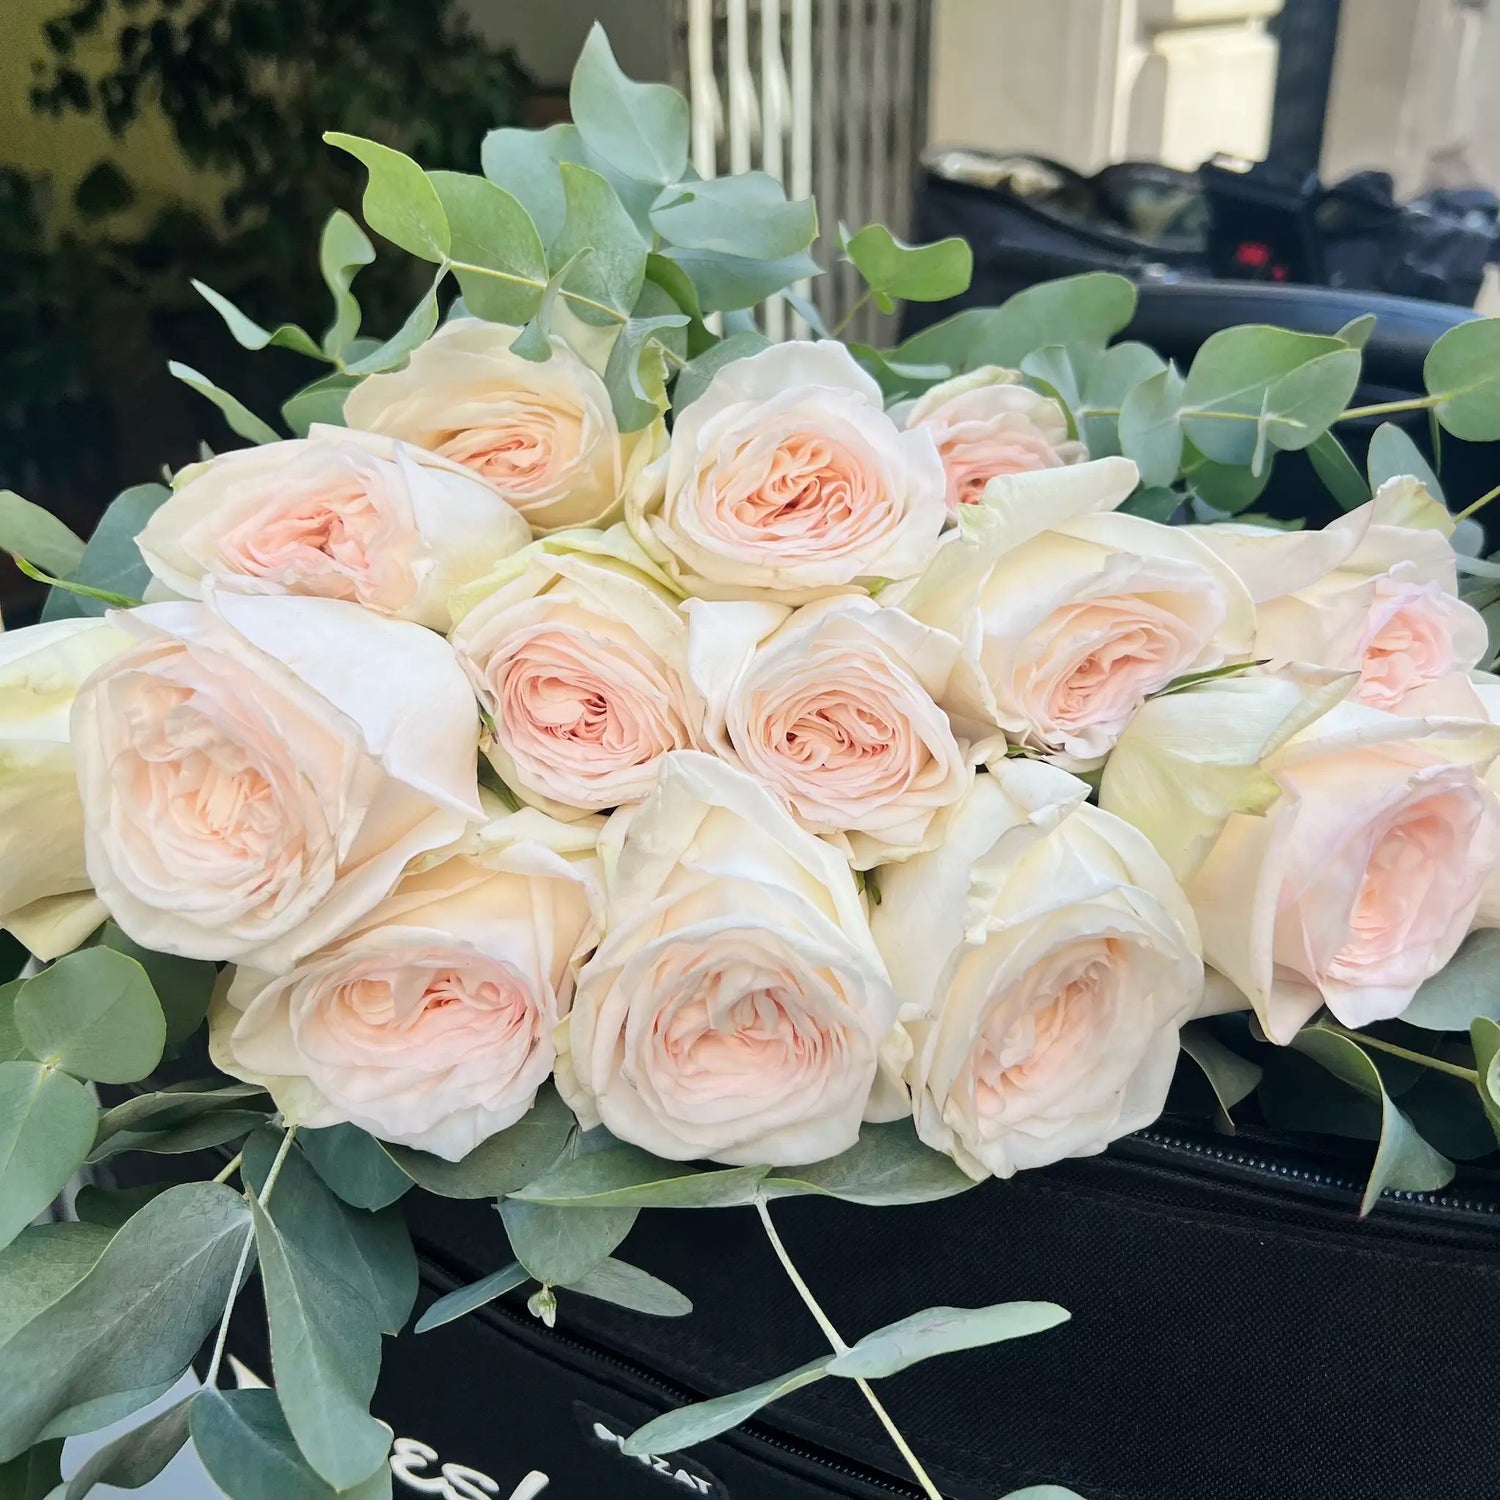 White roses for sympathy occasion